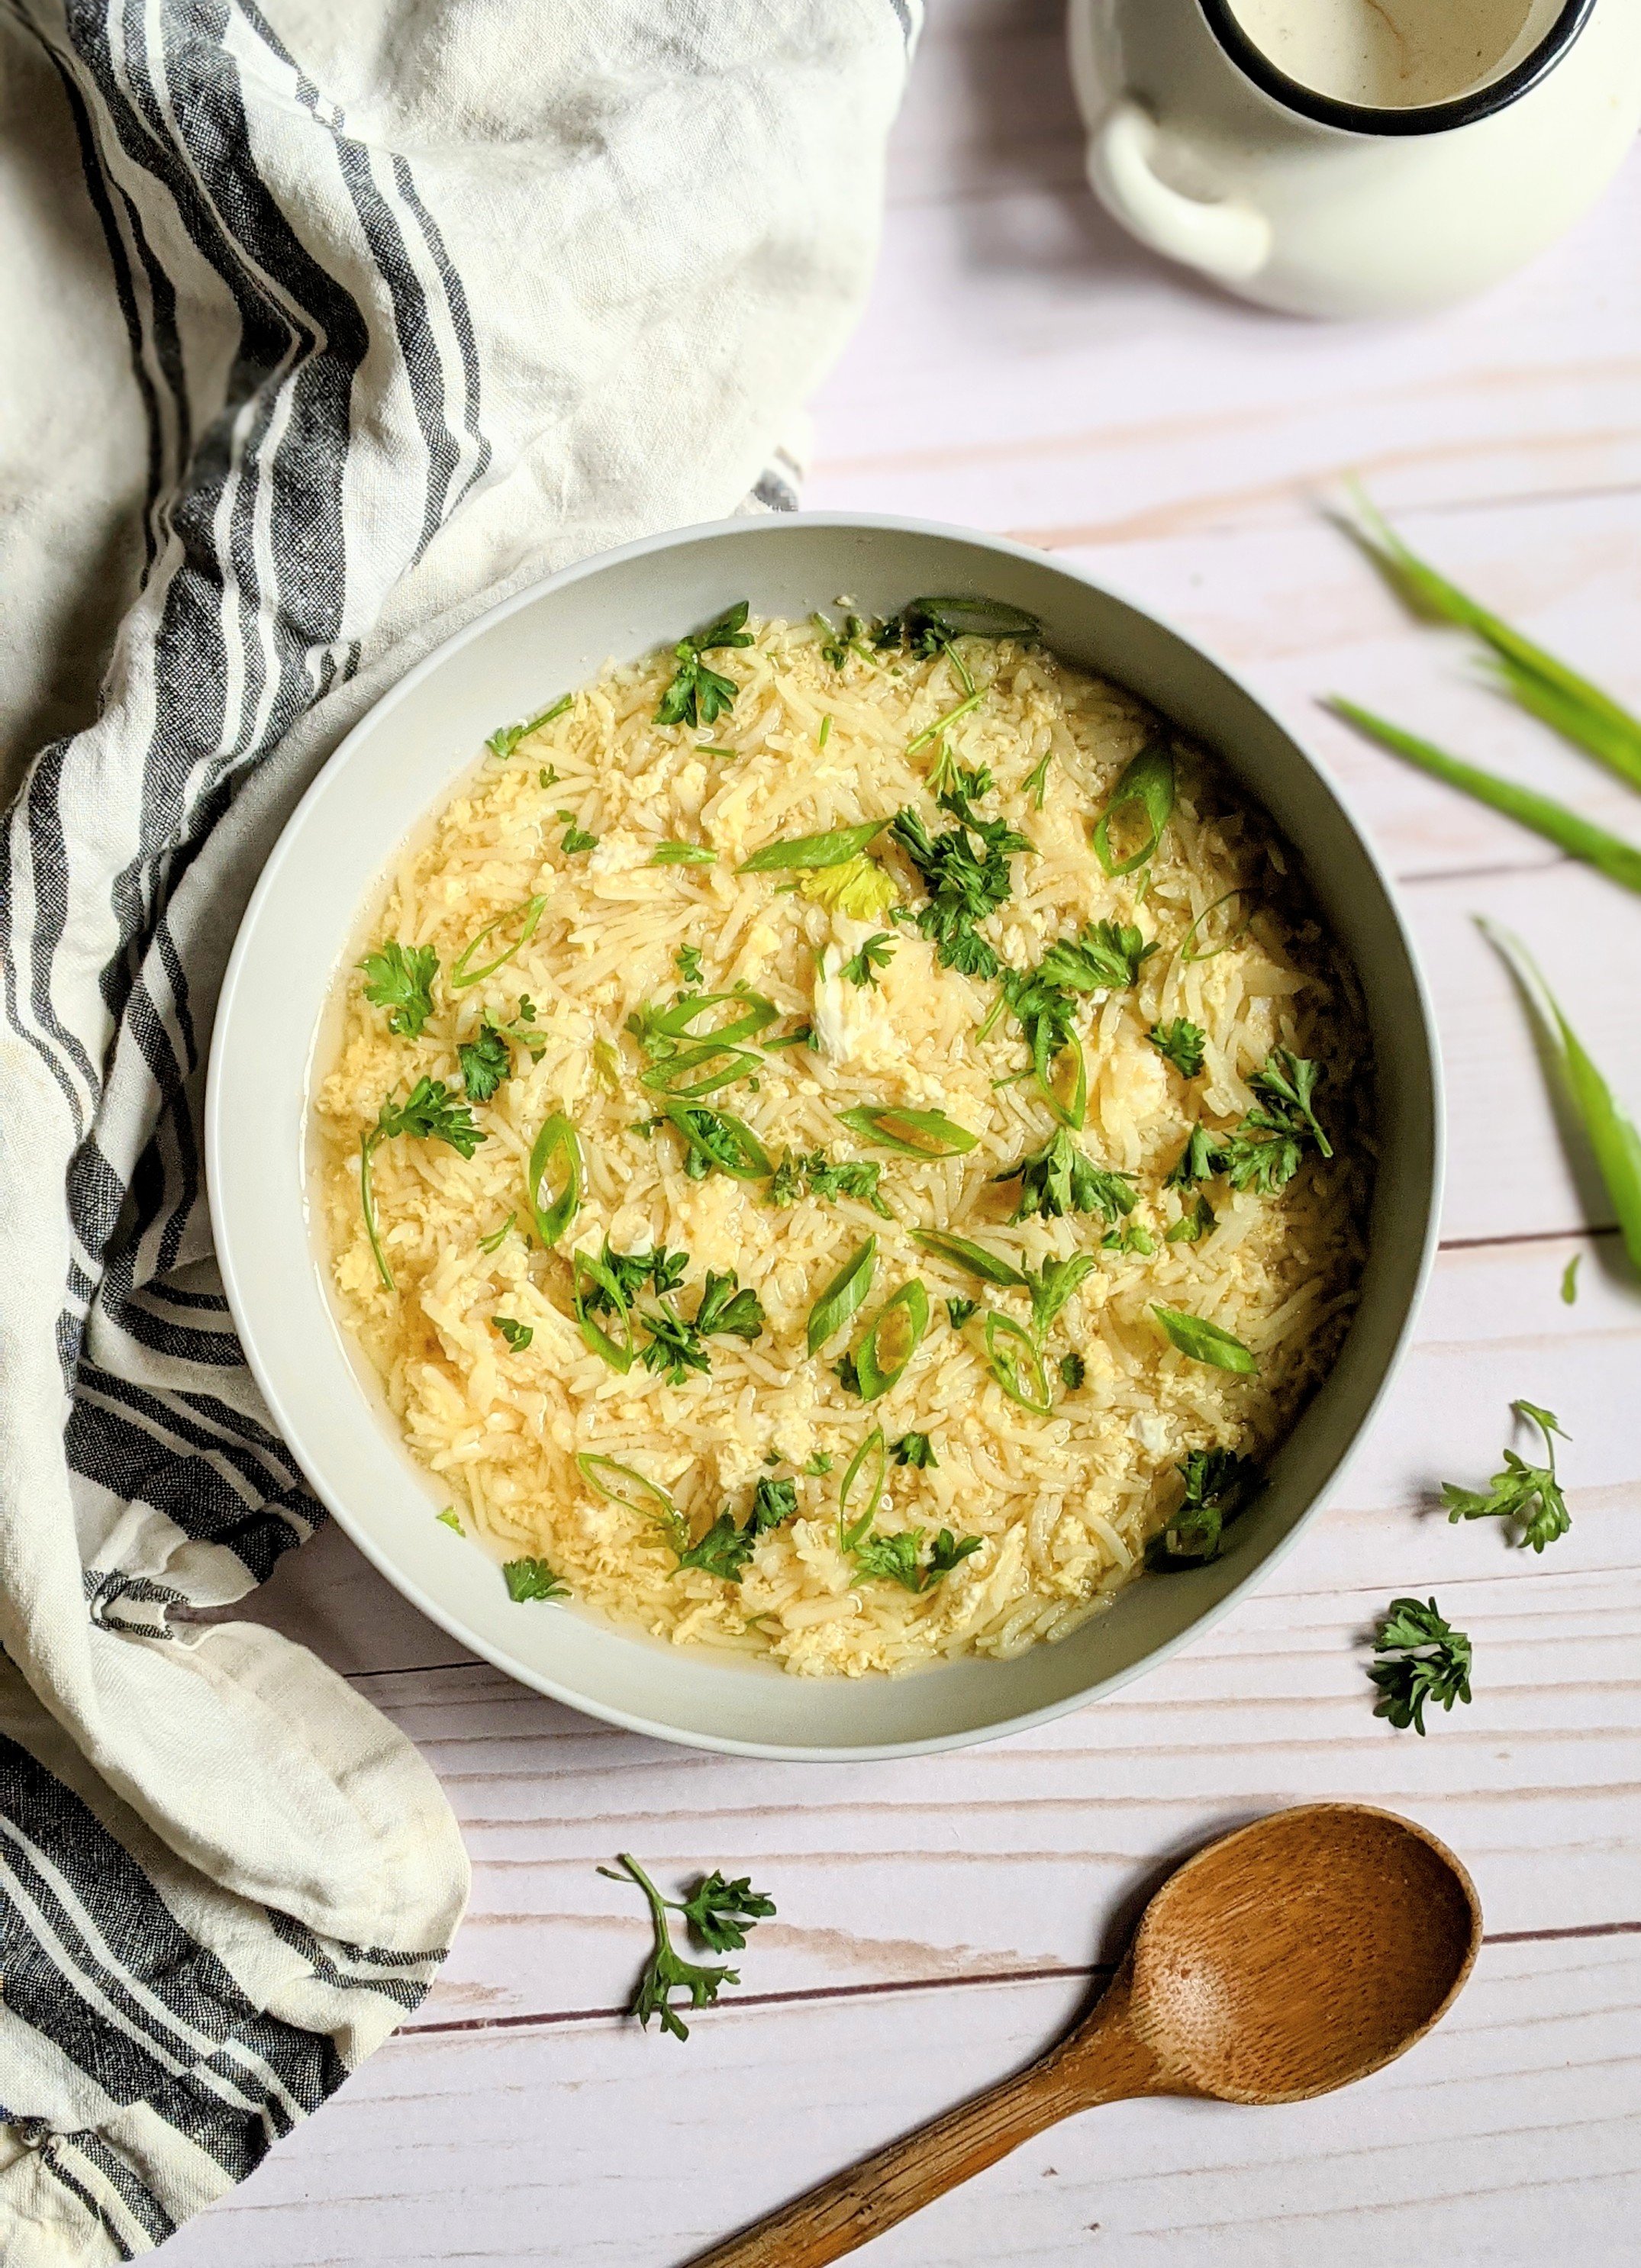 egg drop rice soup recipe vegetarian recipes with leftover rice what to do with rice leftovers healthy ways to repurpose cooked rice recipes lunch or dinner